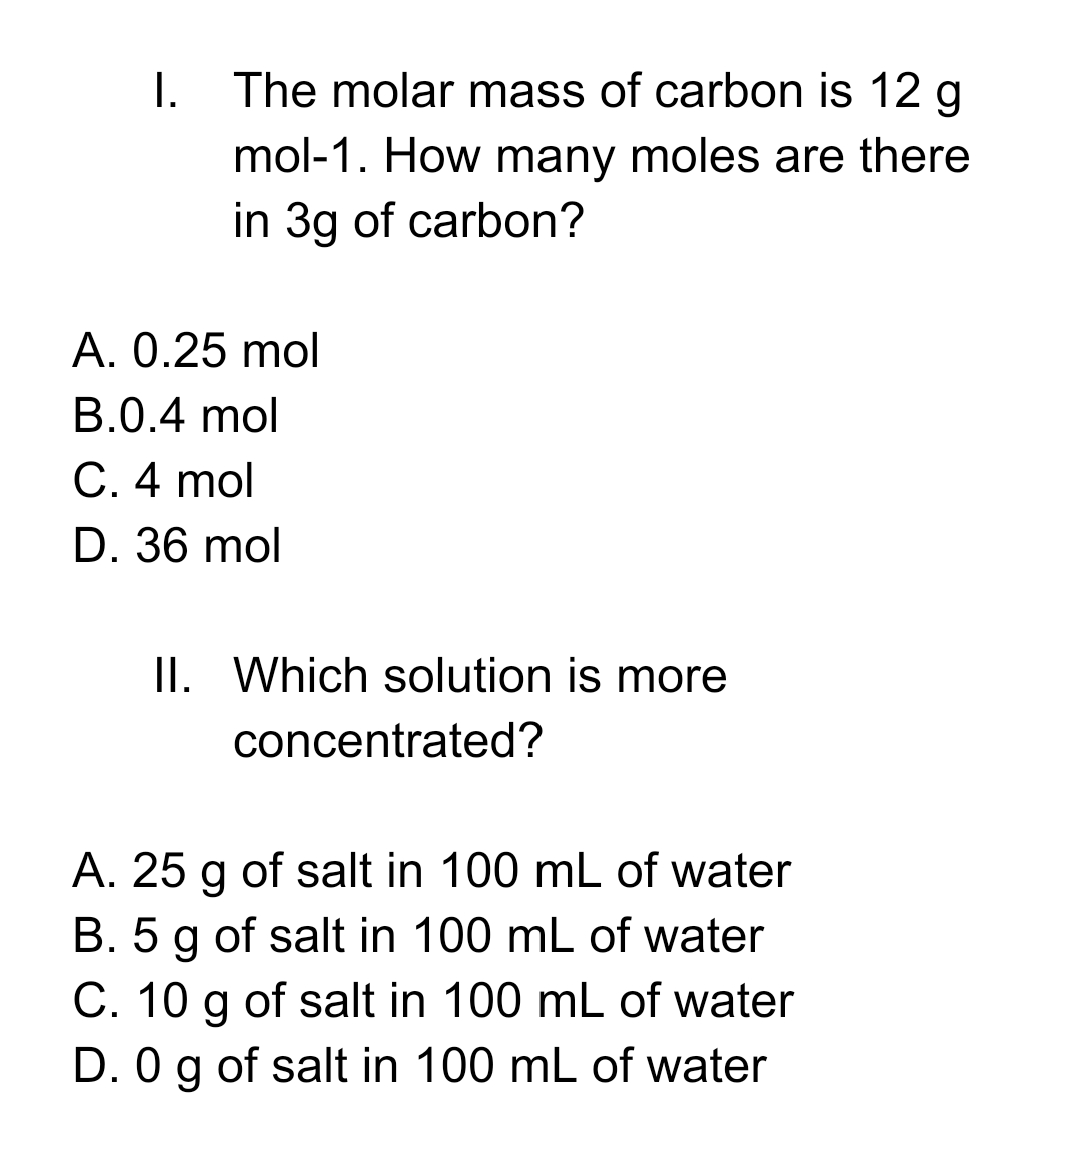 I.
The molar mass of carbon is 12 g
mol-1. How many moles are there
in 3g of carbon?
A. 0.25 mol
B.0.4 mol
C. 4 mol
D. 36 mol
II. Which solution is more
concentrated?
A. 25 g of salt in 100 mL of water
B. 5 g of salt in 100 mL of water
C. 10 g of salt in 100 mL of water
D. 0 g of salt in 100 mL of water
